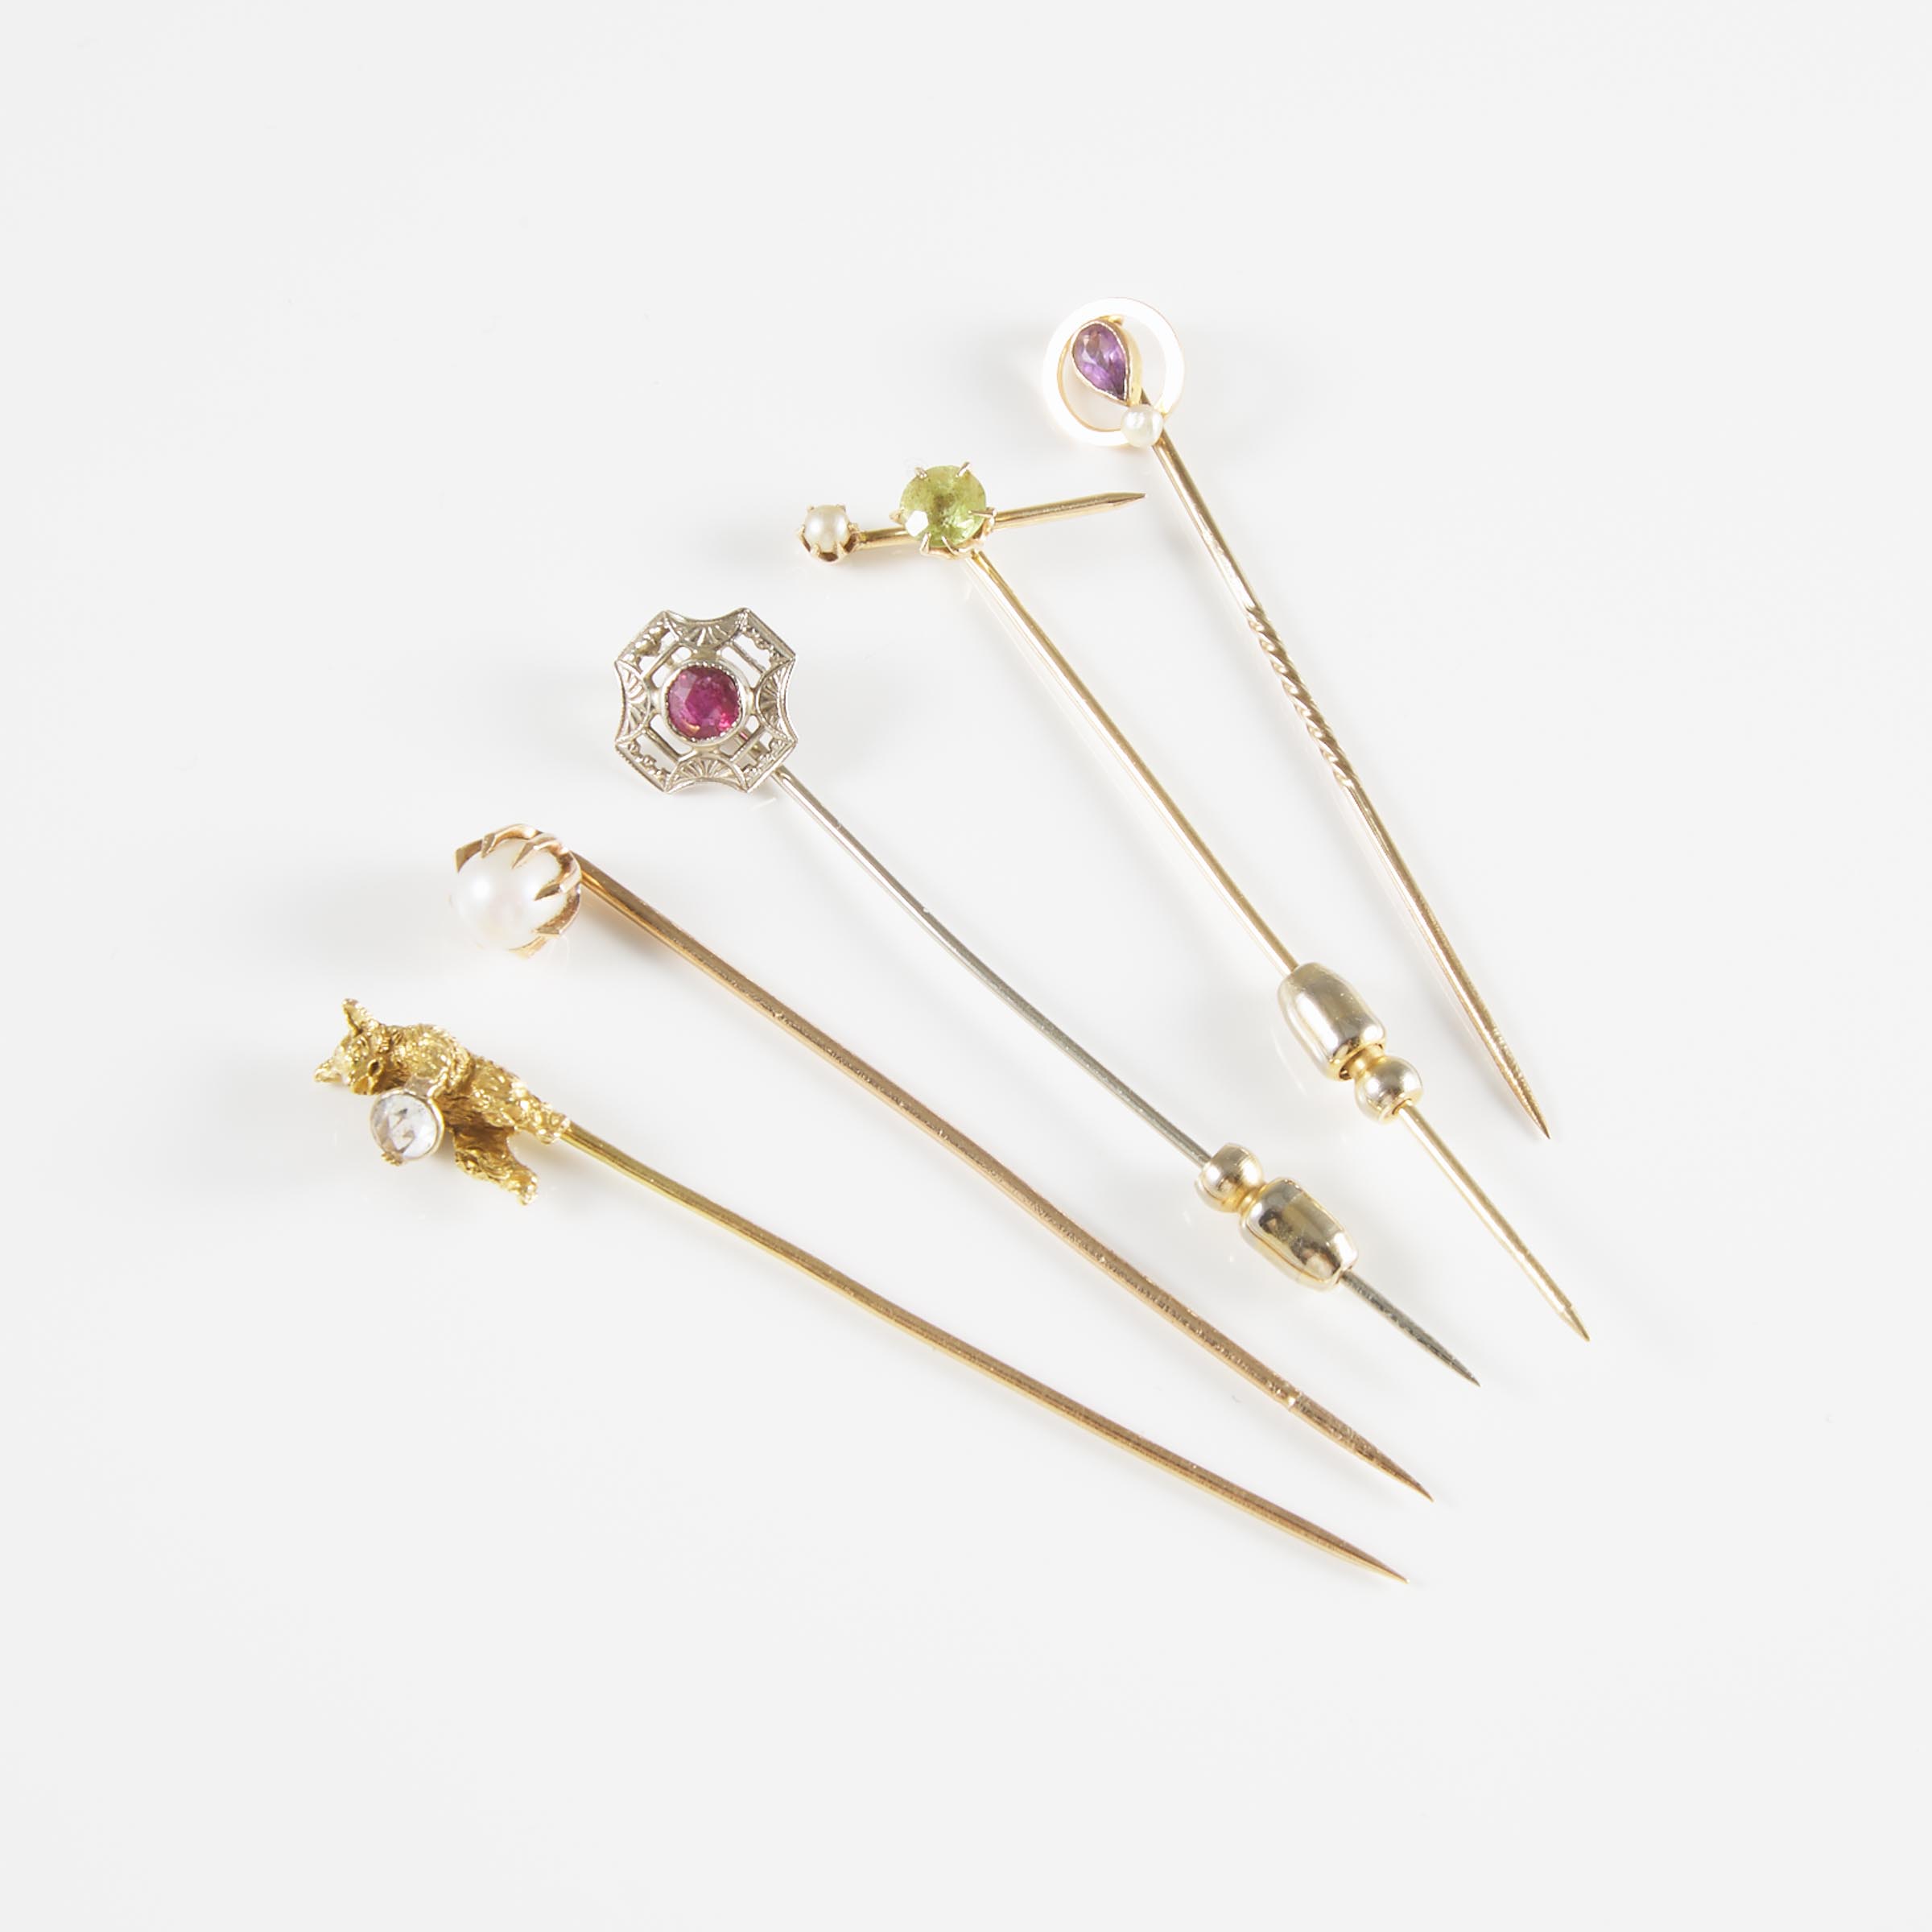 5 Yellow And White Gold Stick Pins